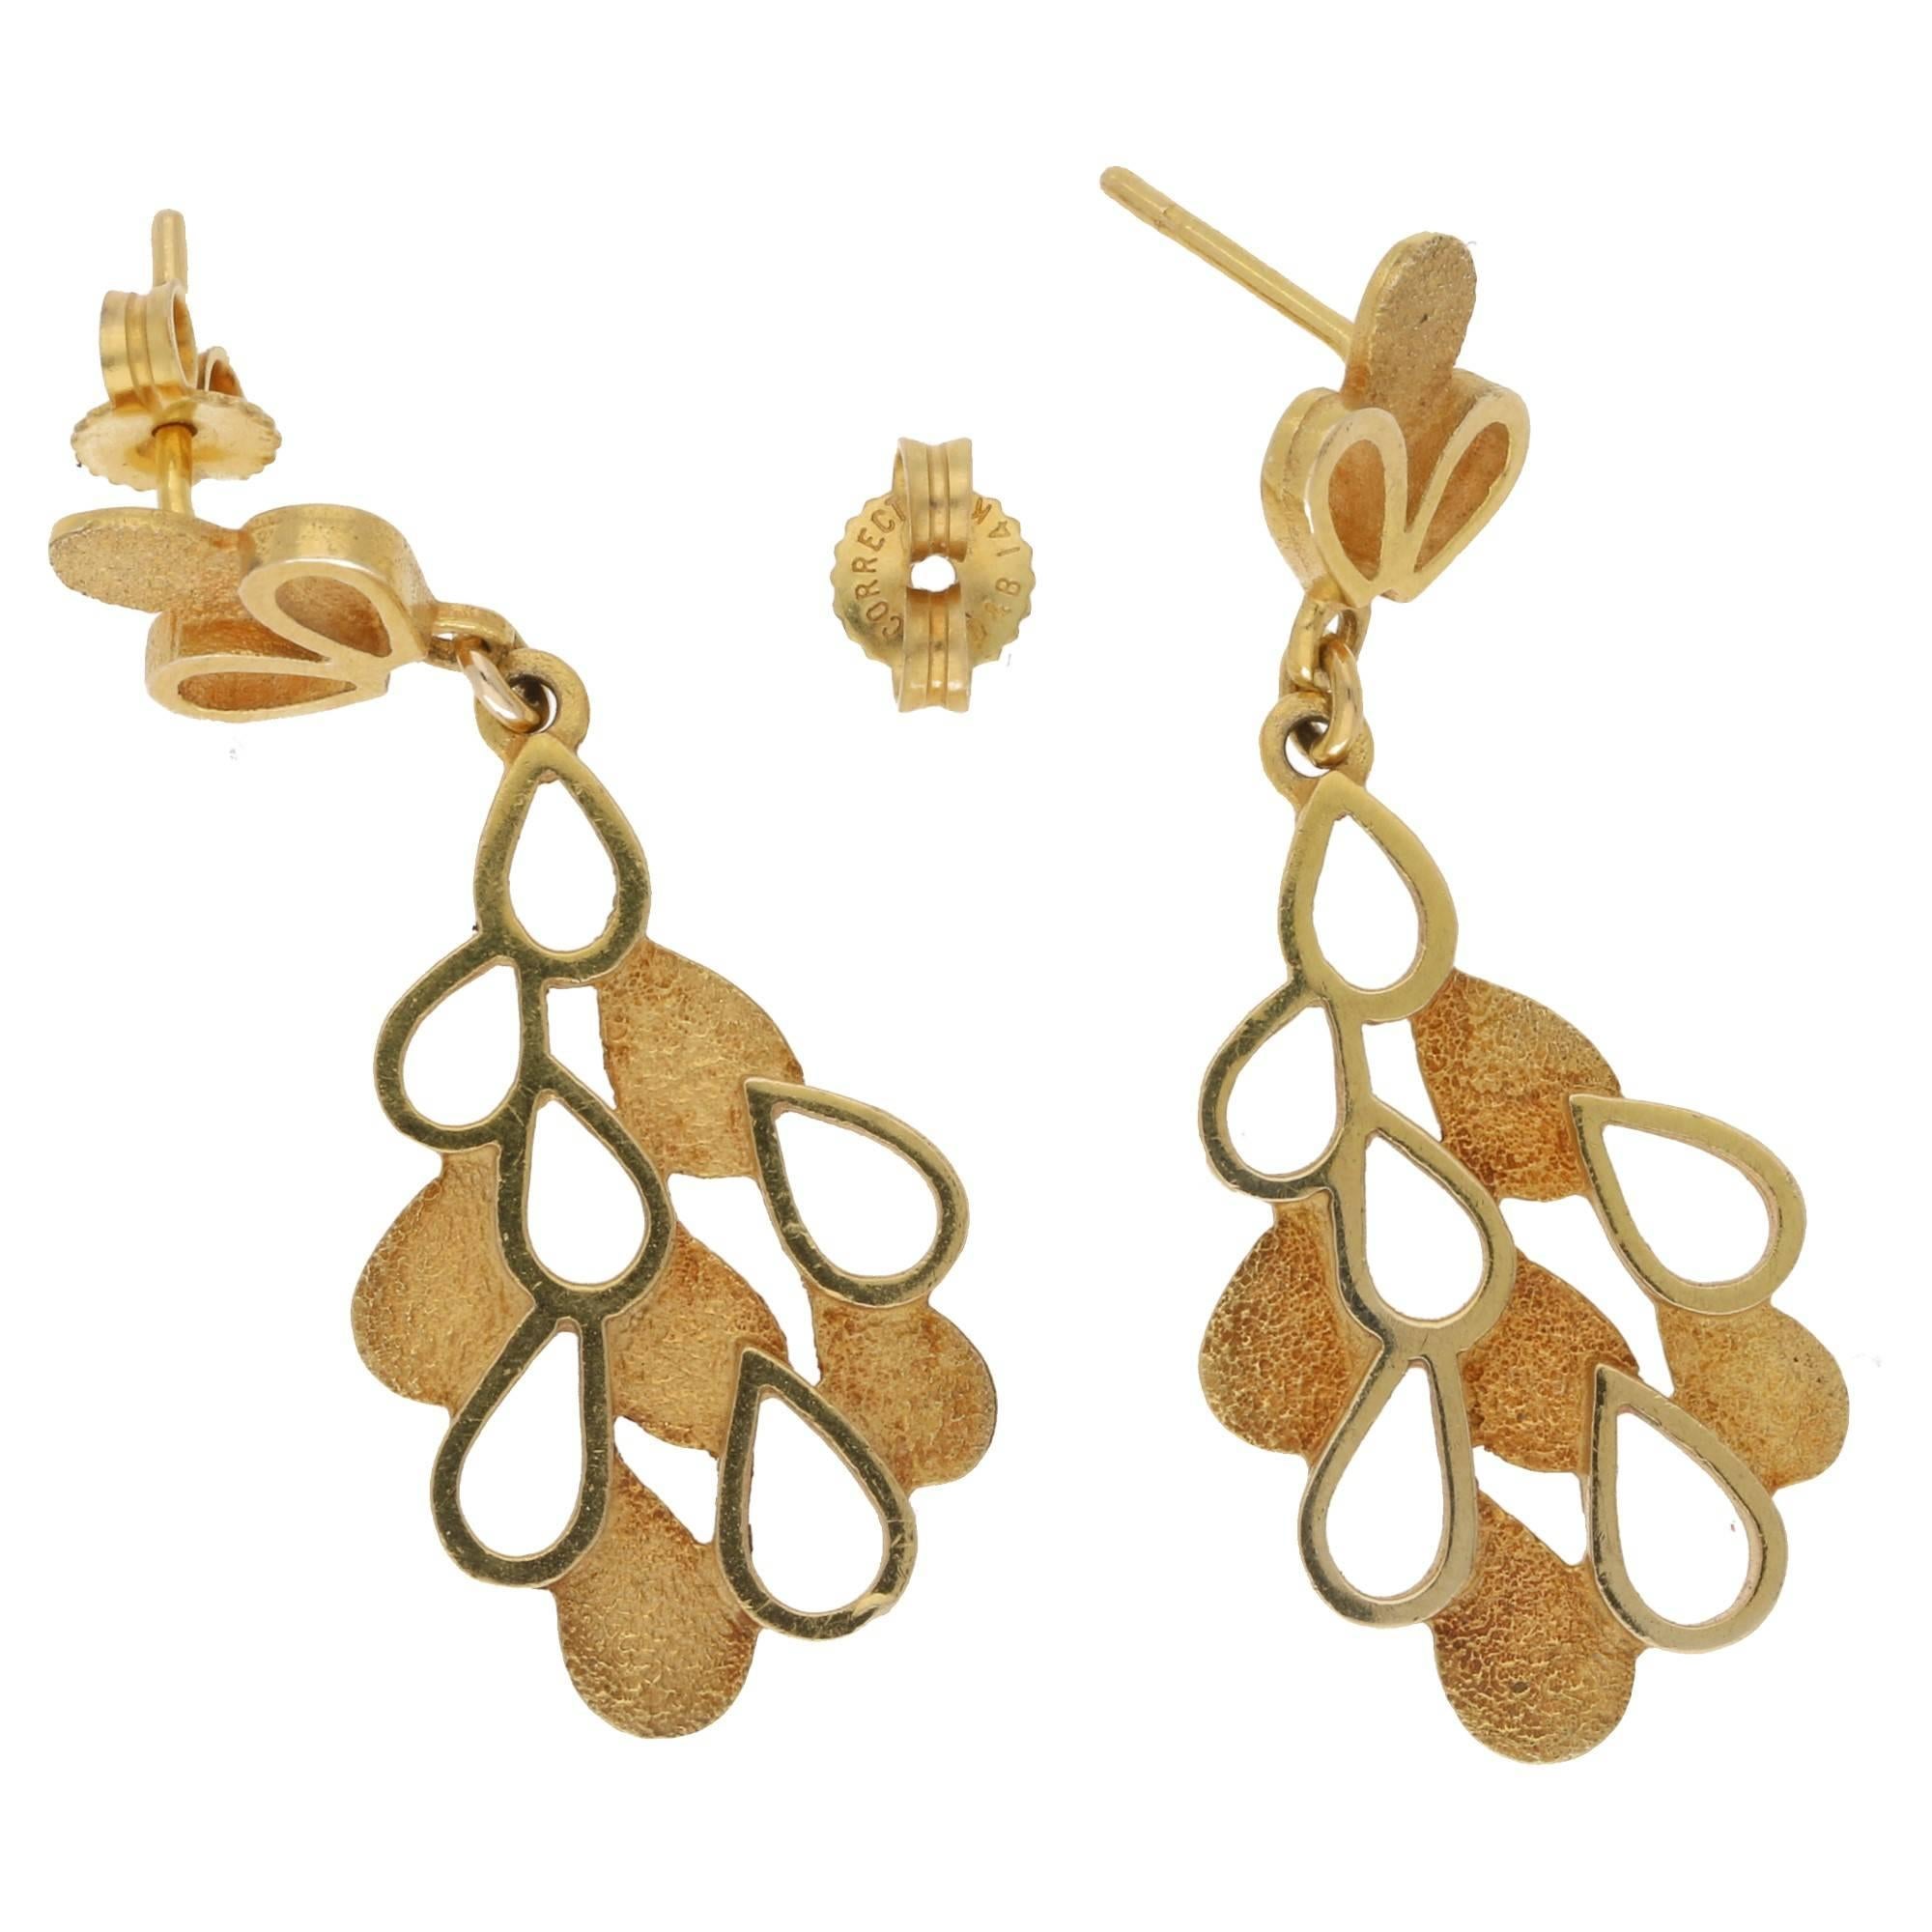 A fanciful pair of 18ct yellow gold textured raindrop cut out earrings. Each comprising of a hanging section with full textured rain drops and empty raindrop cutouts, suspended from a terminal with raindrop like detailing, the centres are textured